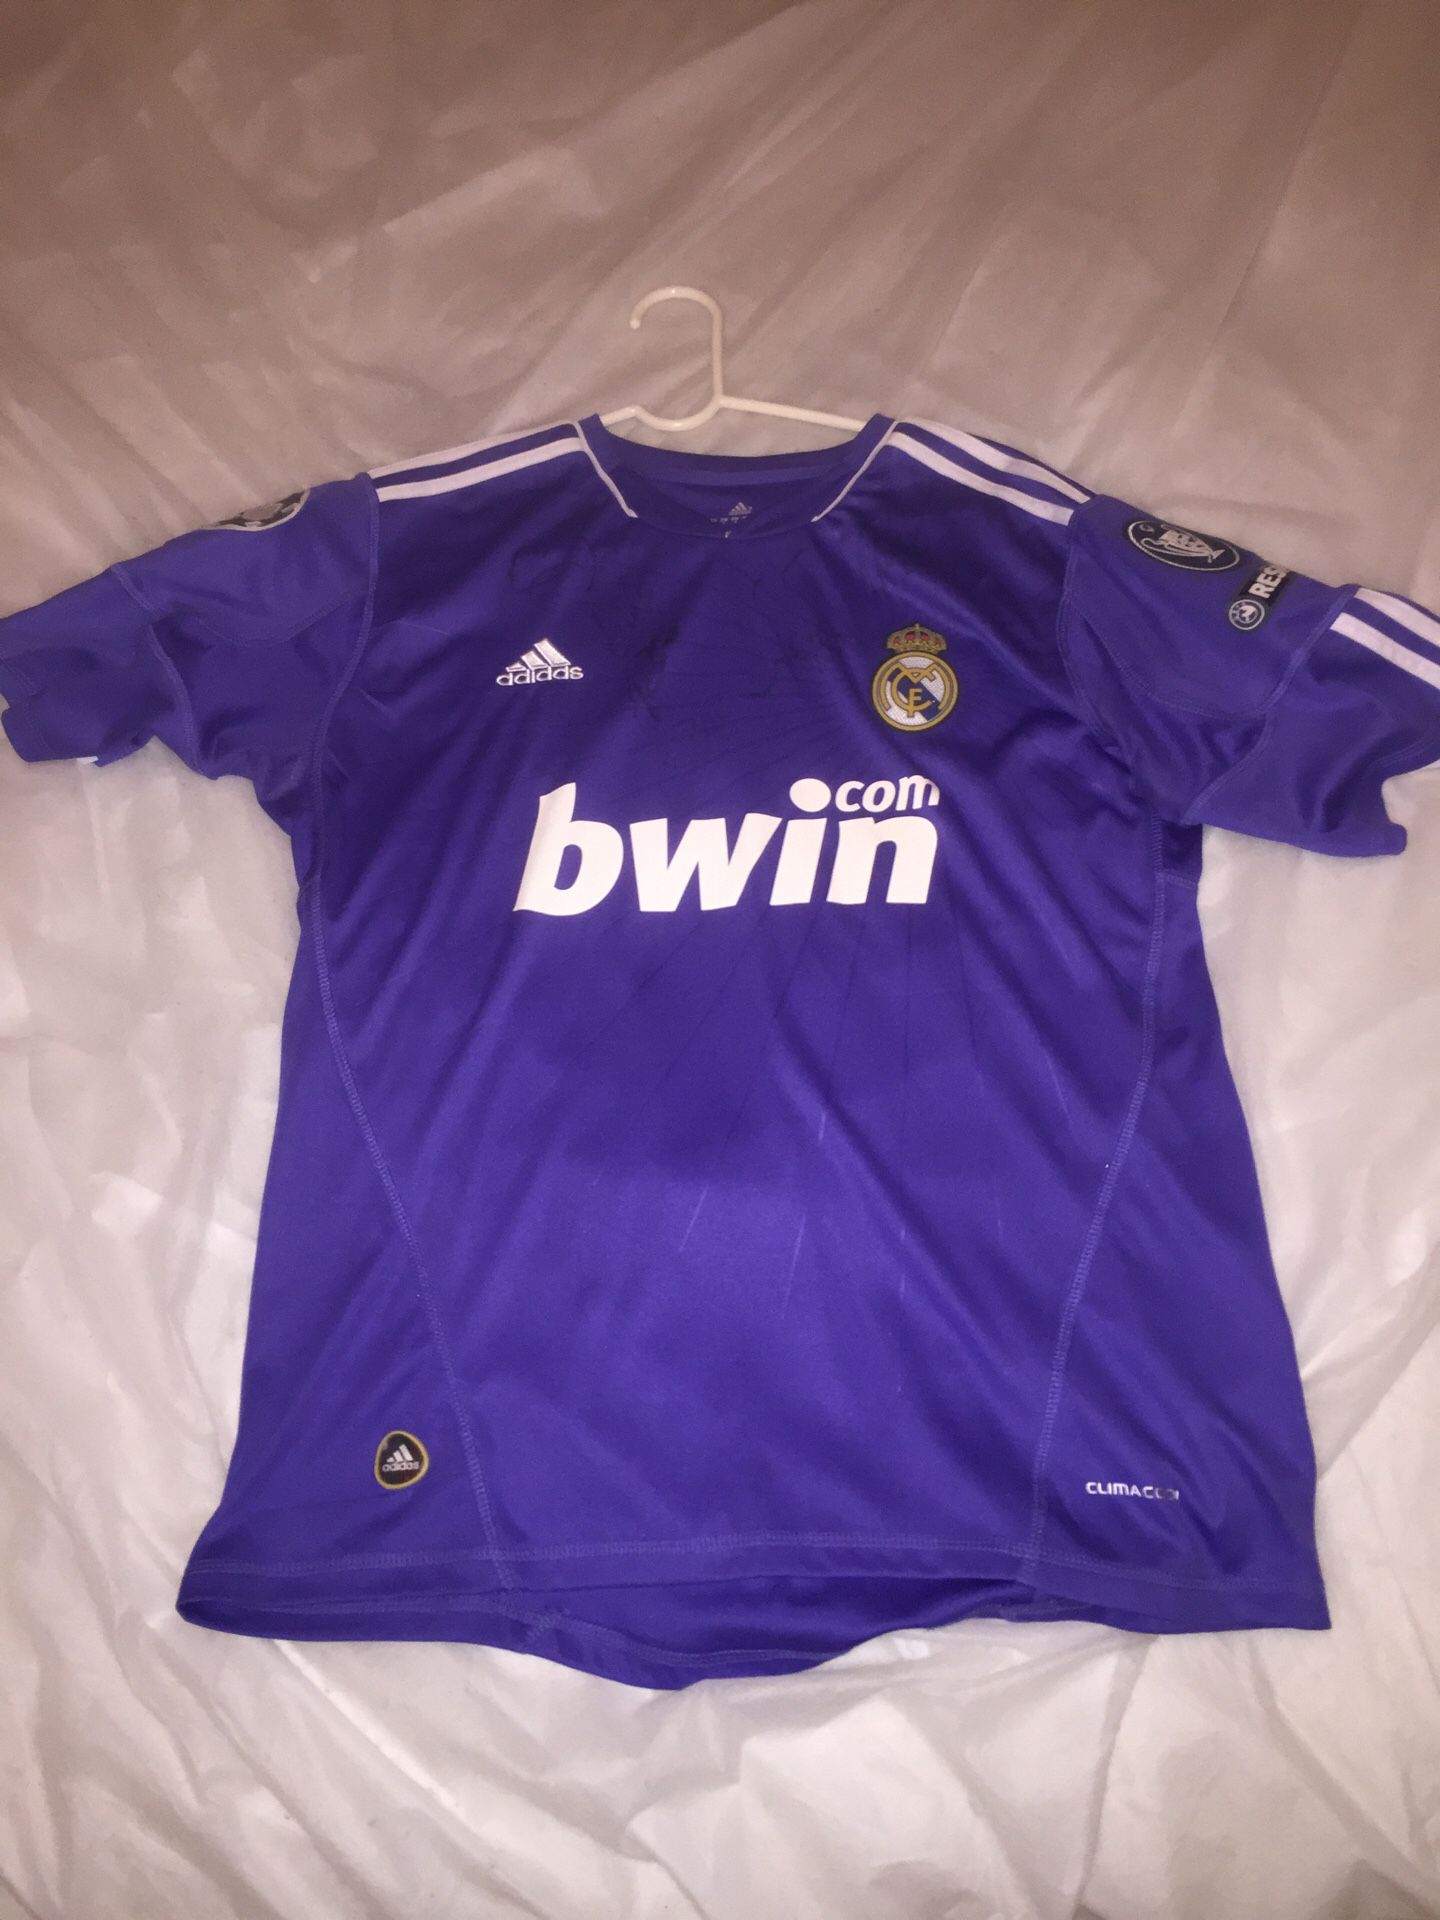 CRISTIANO RONALDO SIGNED REAL MADRID #7 JERSEY BWIN ADIDAS CHAMPIONS LEAGUE UEFA RESPECT. SIGNED BY NEYMAR, THIAGO SILVA, HULK, MARCELO, and more!